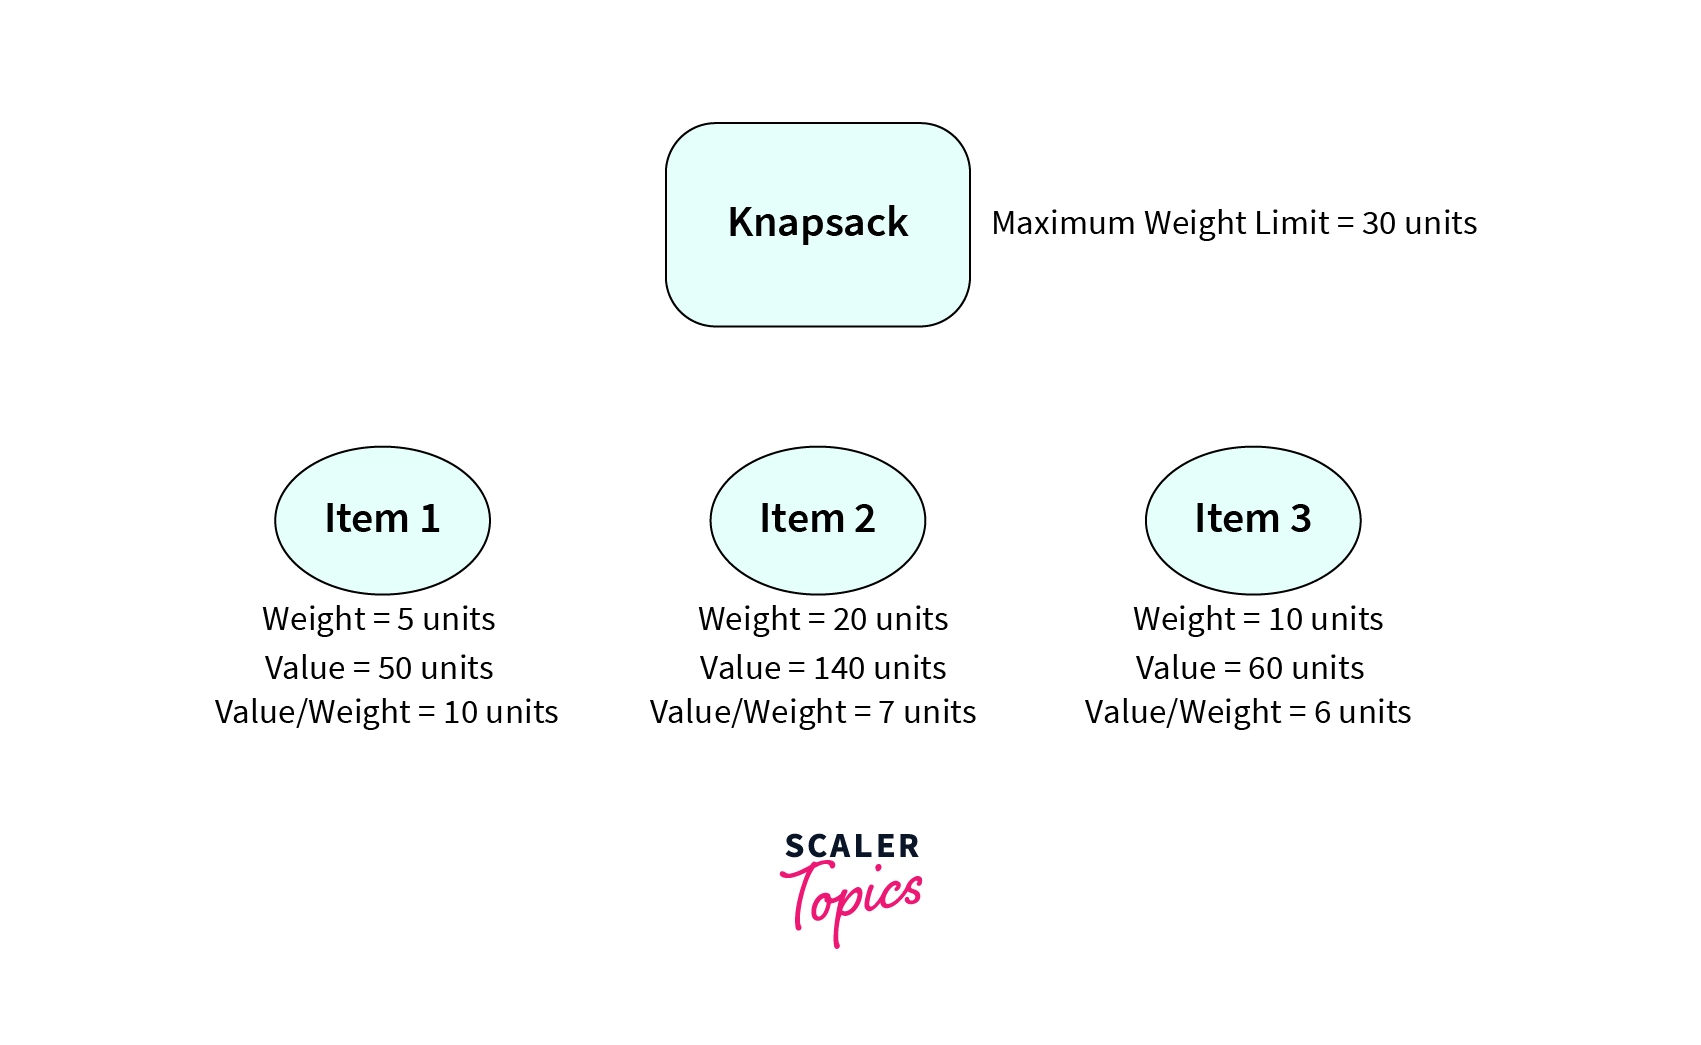 Select the item with the maximum value by weight ratio to fill the knapsack.